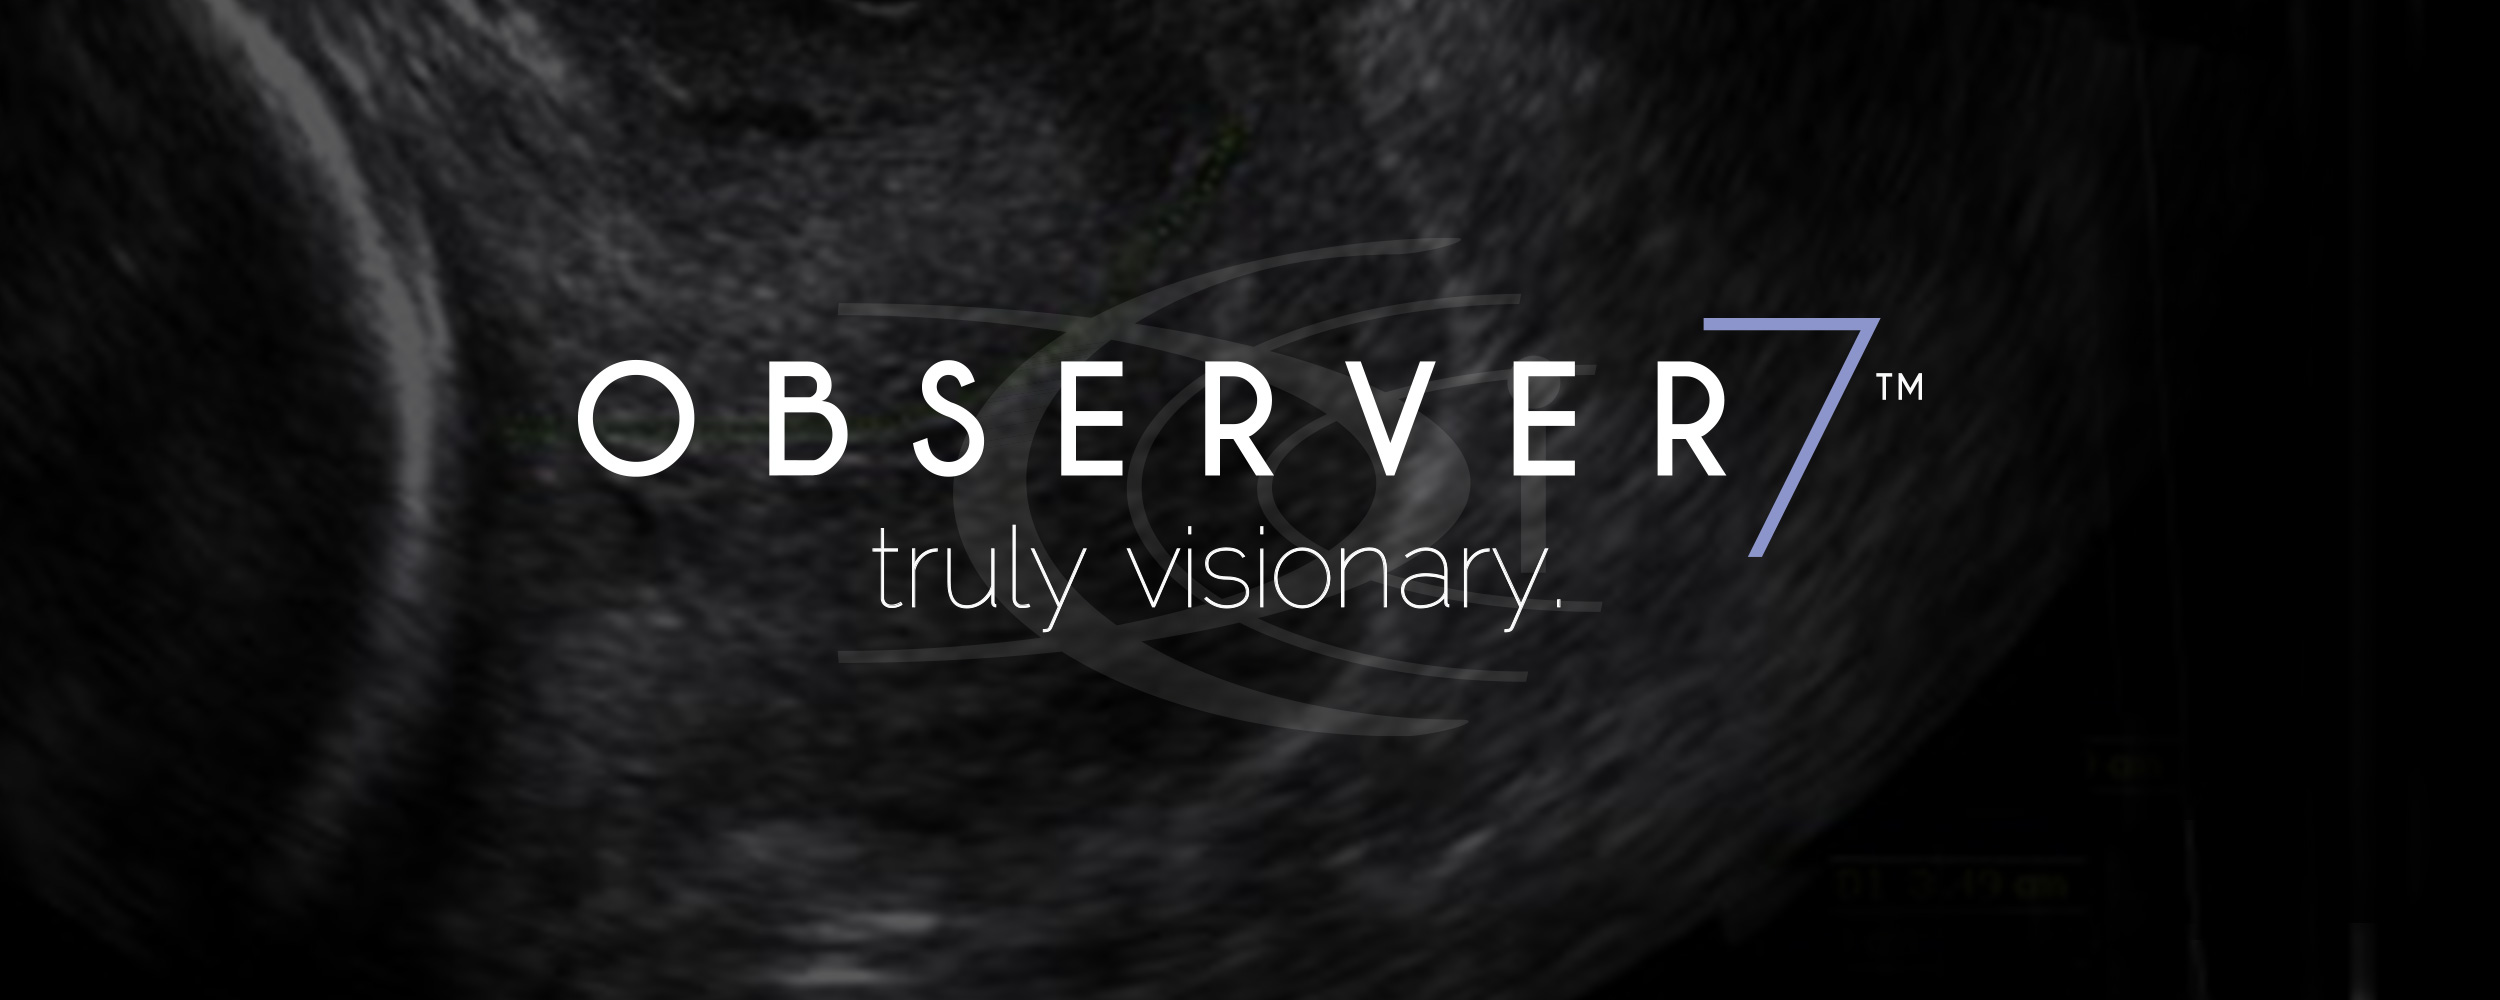 Observer 7, truly visionary